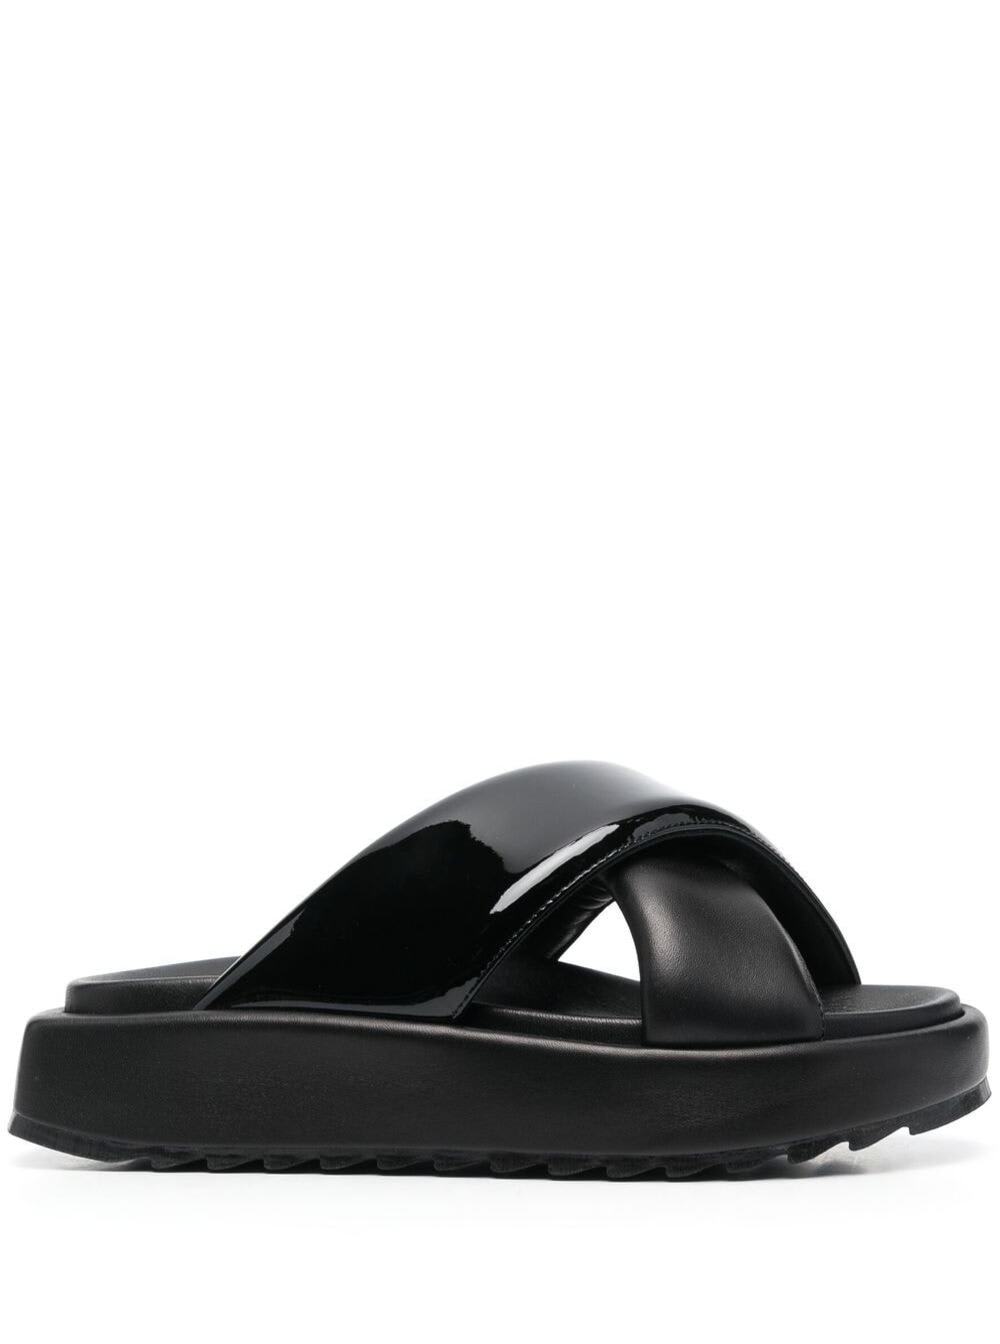 Black Crossover Strap Slides Glossy Finish In Leather Woman